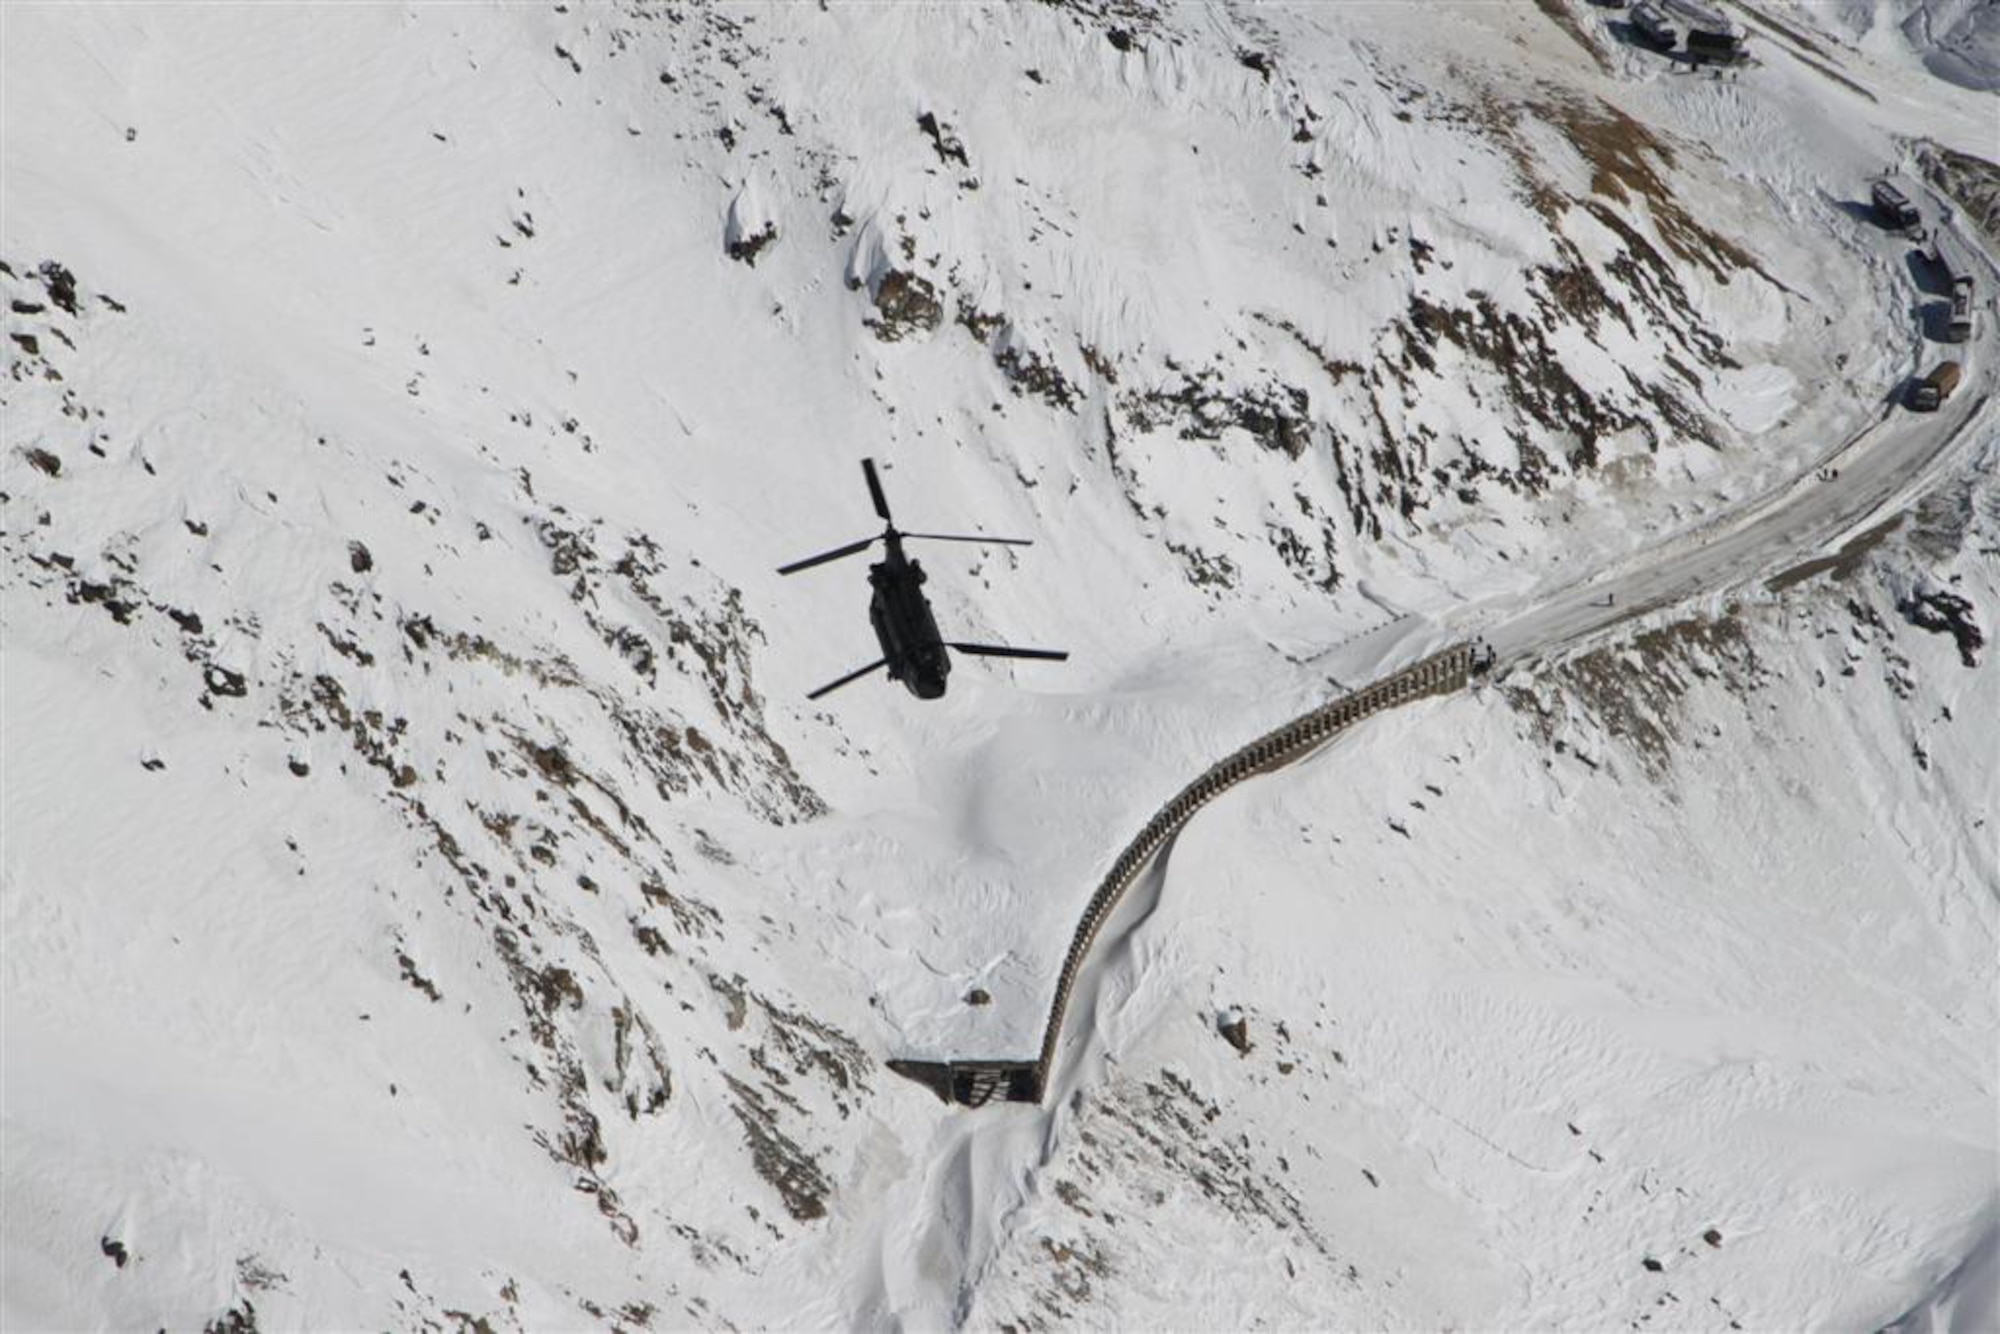 A U.S. Army CH-47 helicopter survey's the area during a rescue operation in the Salang Pass, Afghanistan, Feb. 9, 2010. This type of helicopter completed 12 flights to evacuate Afghans who were stranded by more than 36 avalanches. (Courtesy photo)